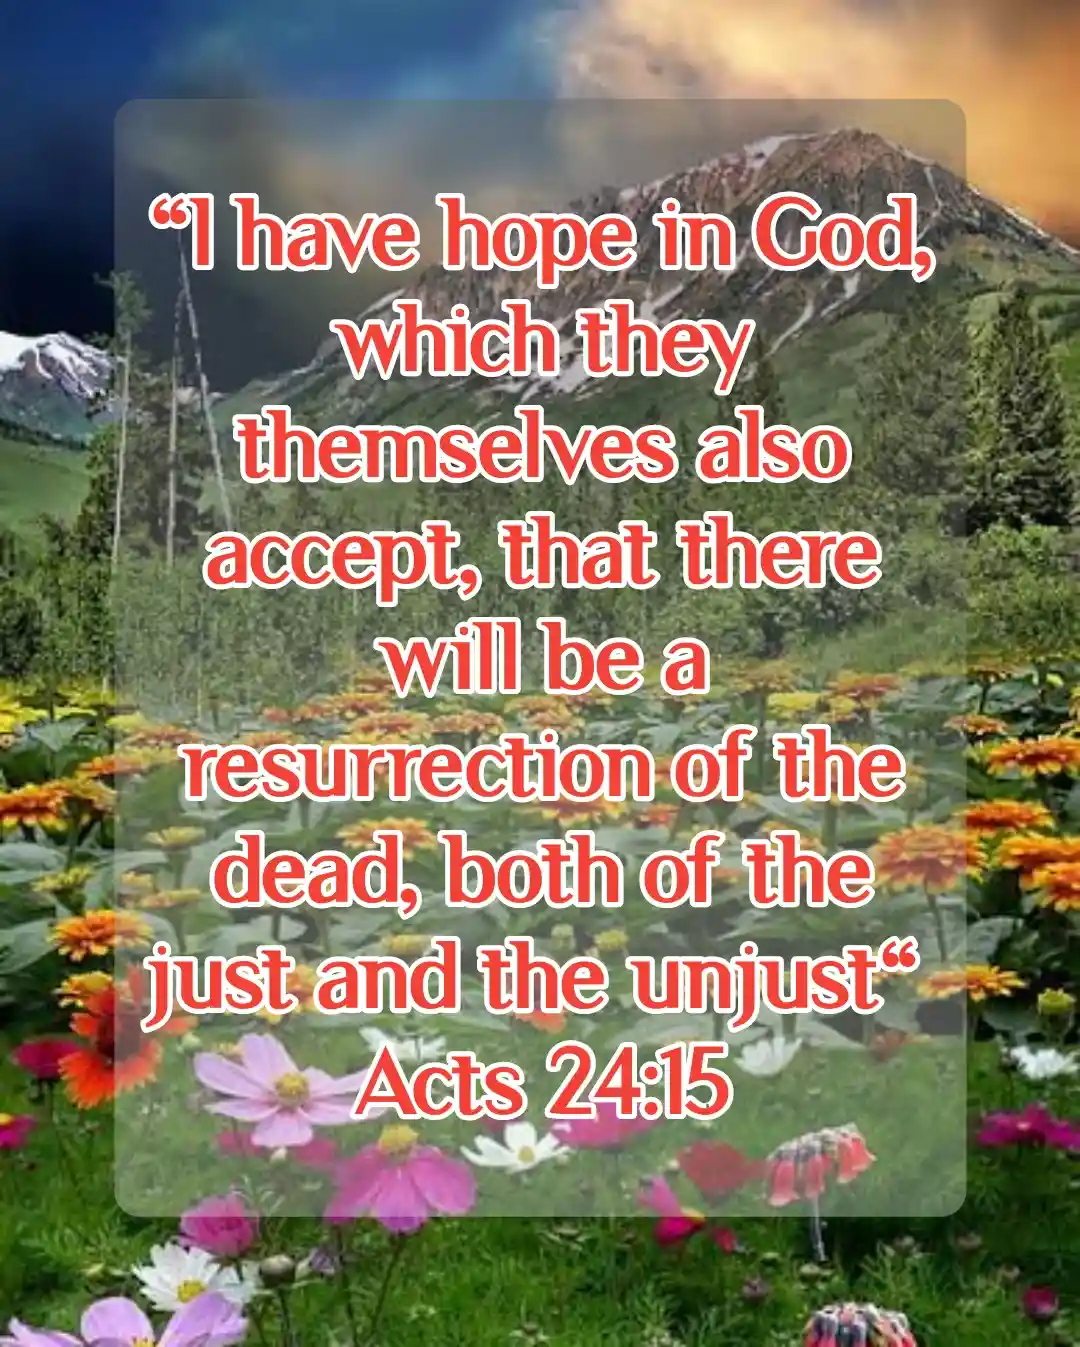 Bible Verse For Resurrection (Acts 24:15)